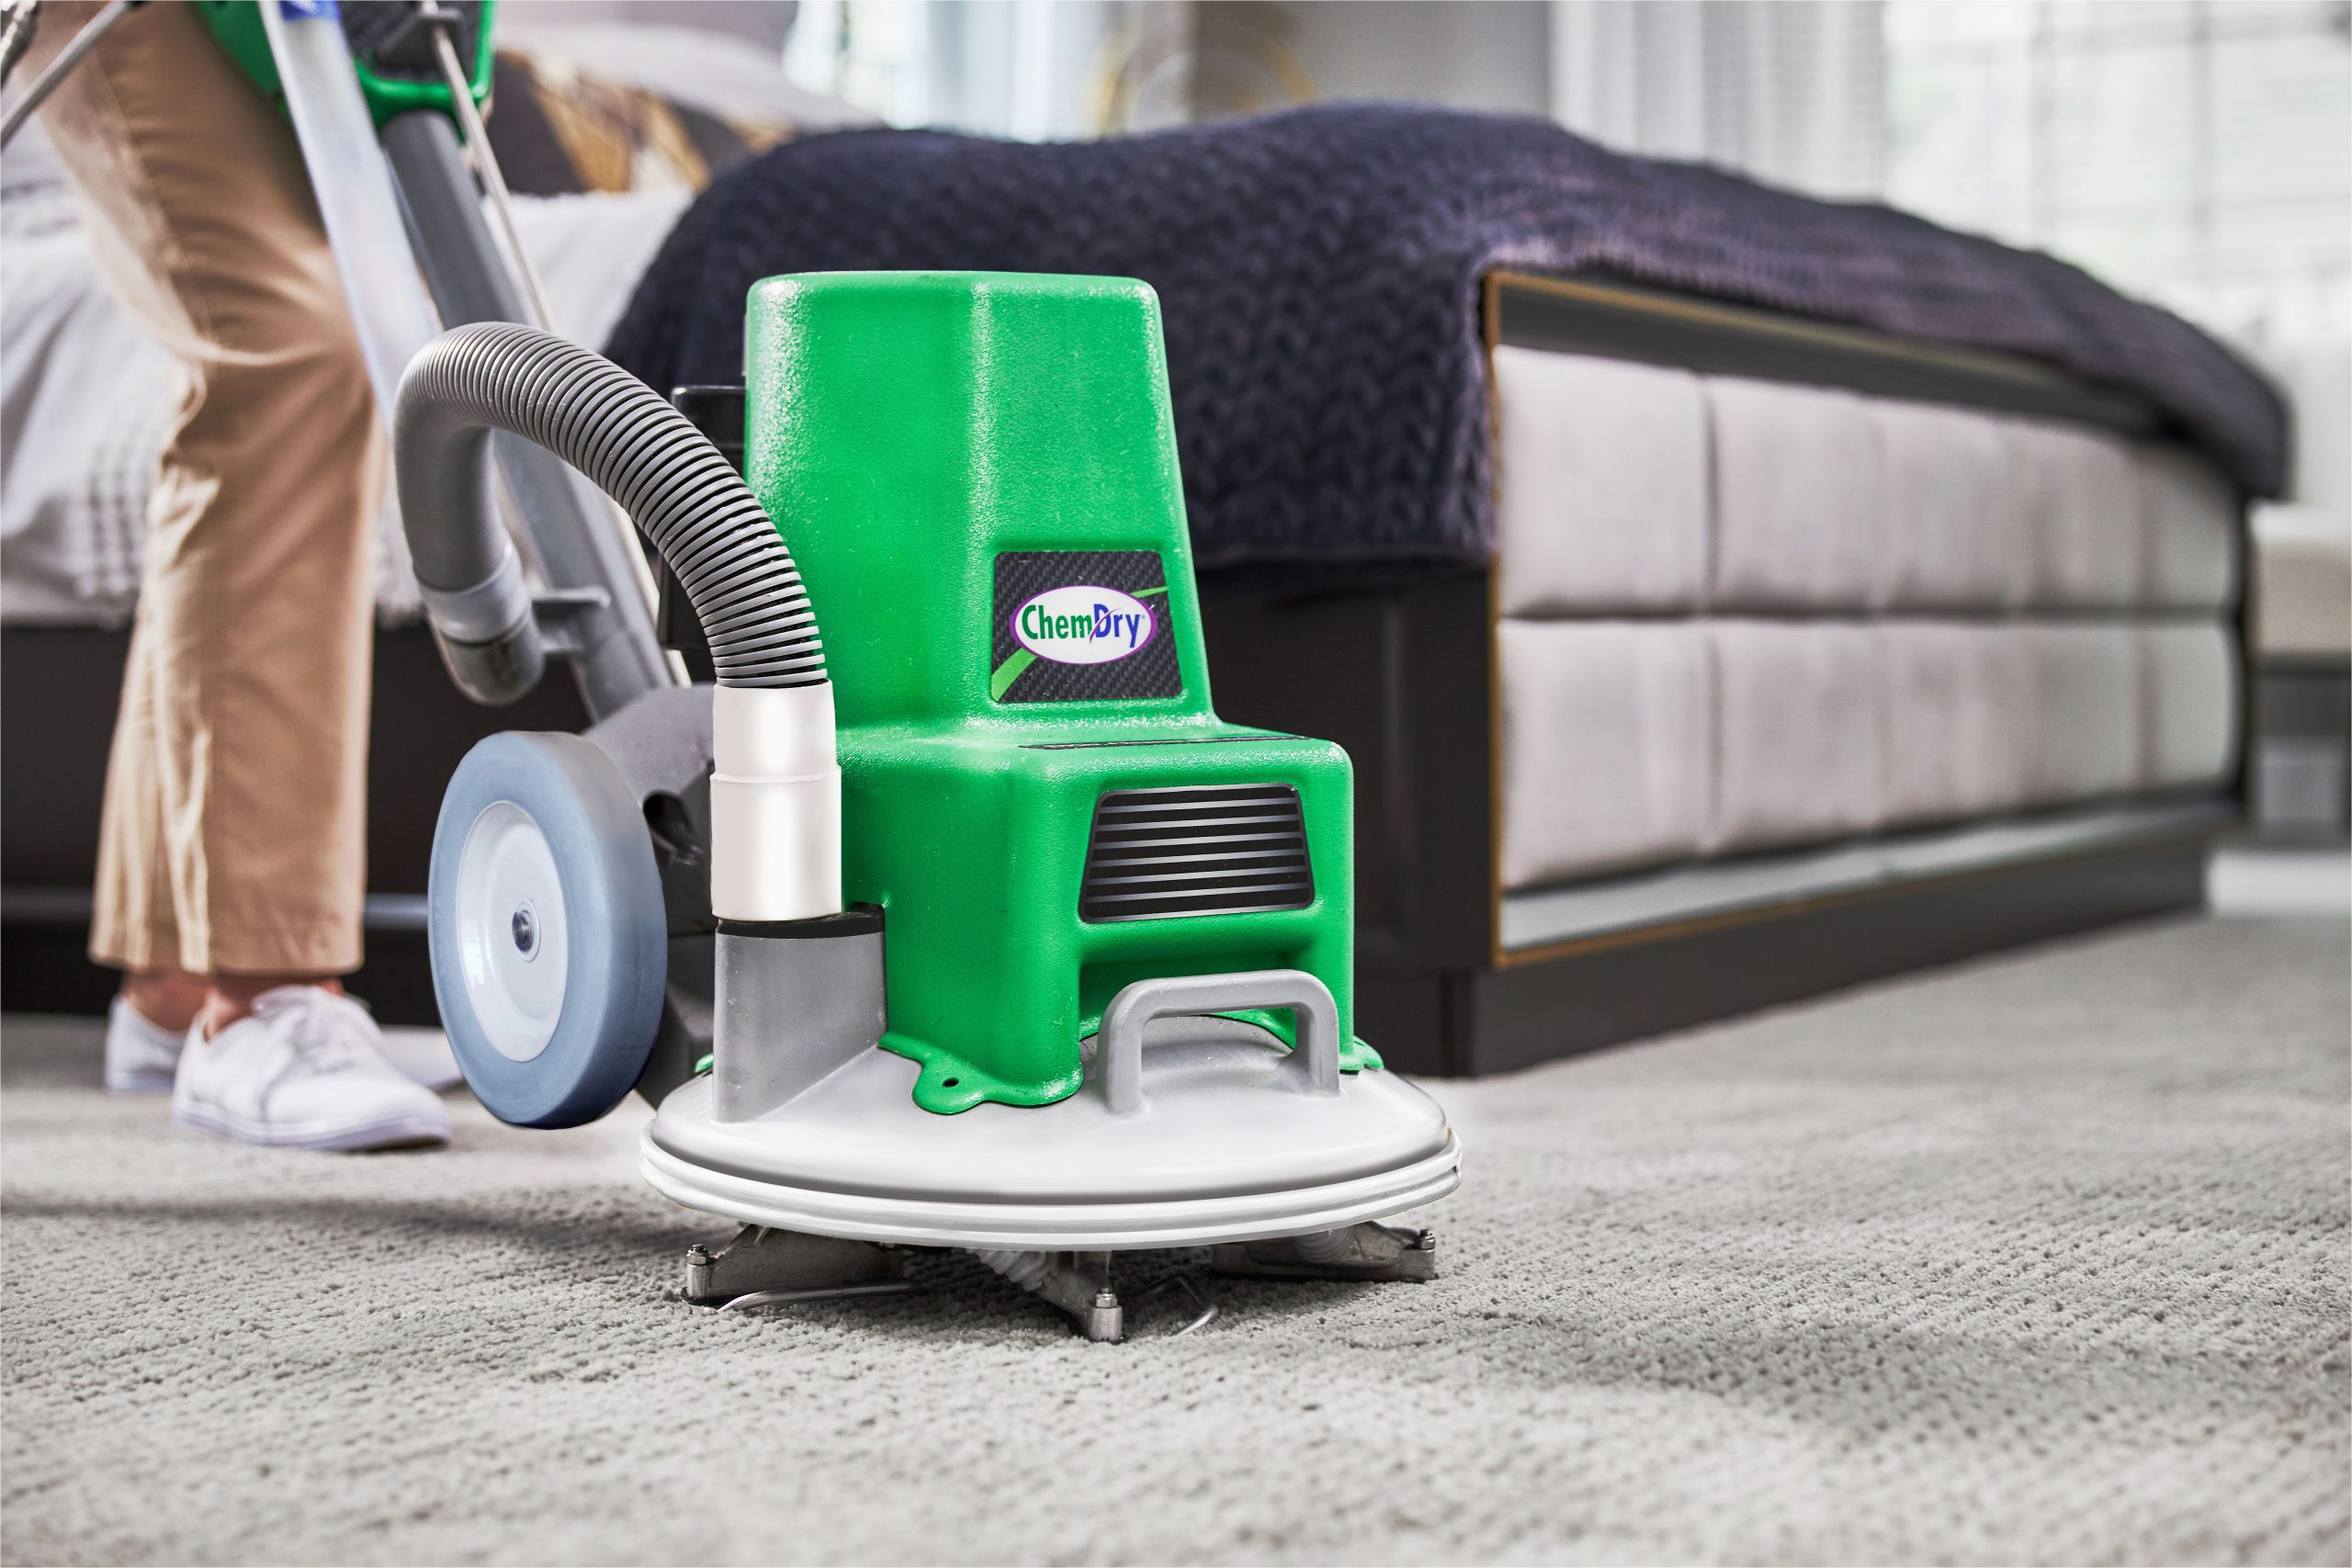 Area Rug Cleaning Greensboro Nc Looking for the Best Carpet Cleaner? Choose Quality.